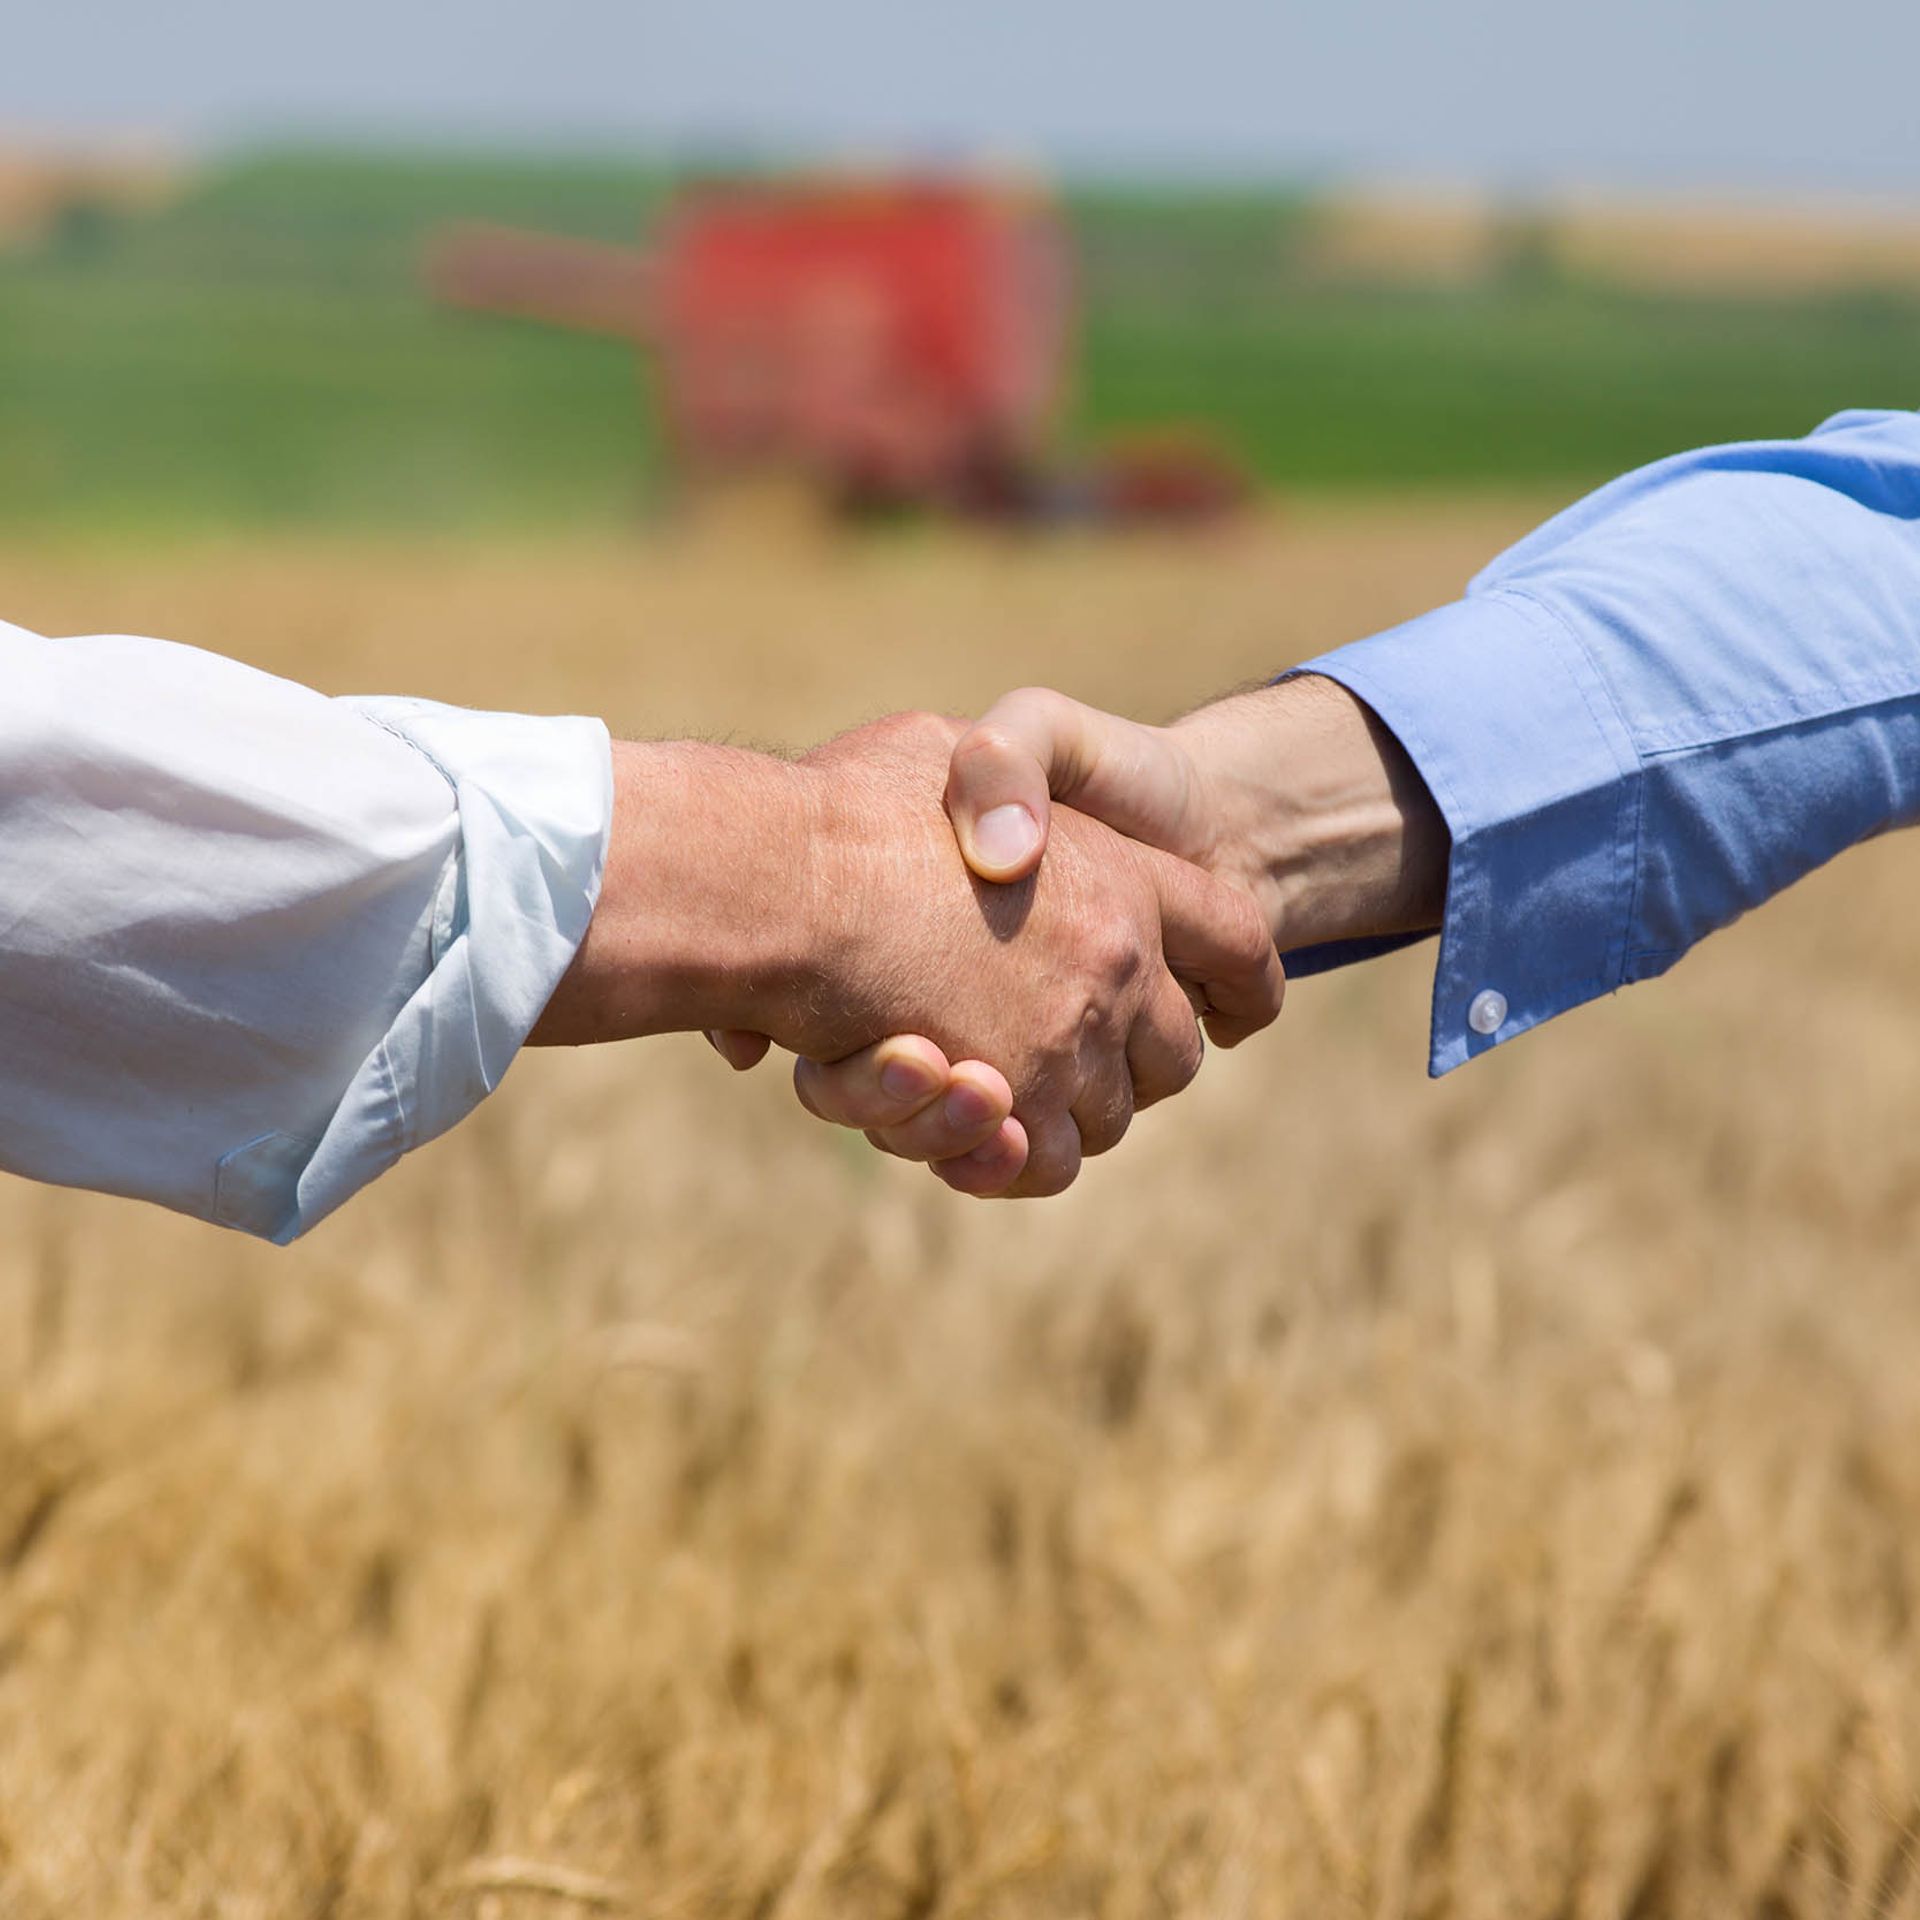 Image of two stakeholders shaking hands in a field of crops